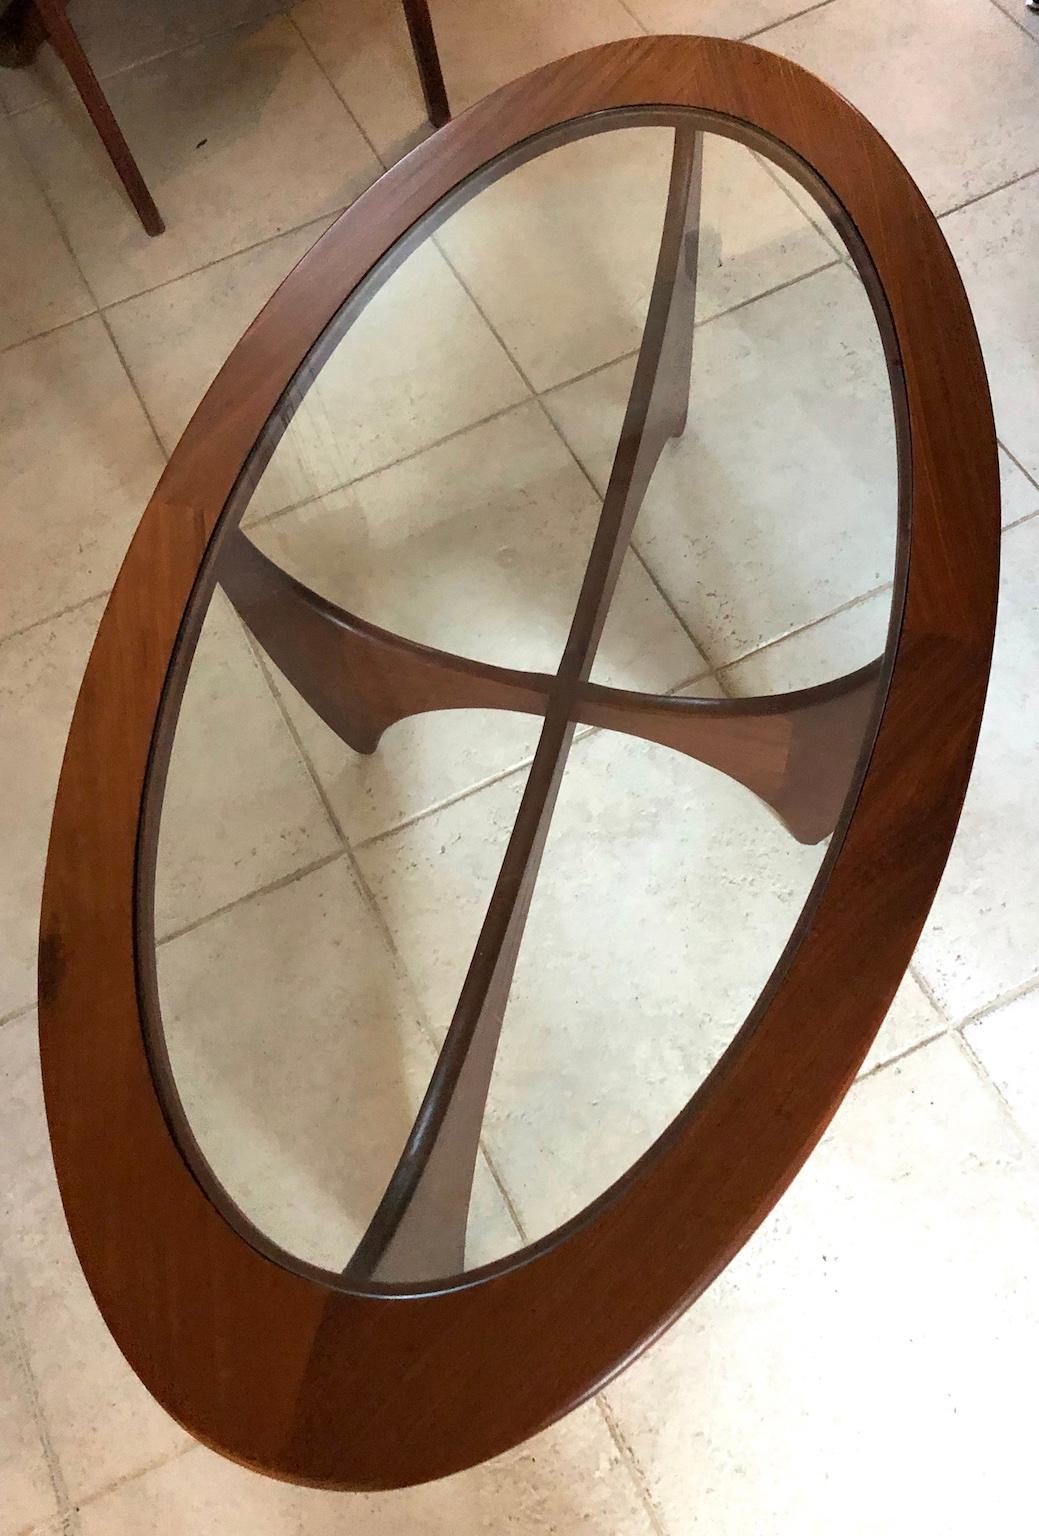 Midcentury oval Astro teak coffee table with glass top by G-Plan, 1960s
A beautiful sculptural coffee table designed by Victor Wilkins and manufactured 
by G Plan during the 1960s in England.
In great condition, table has recently been restored